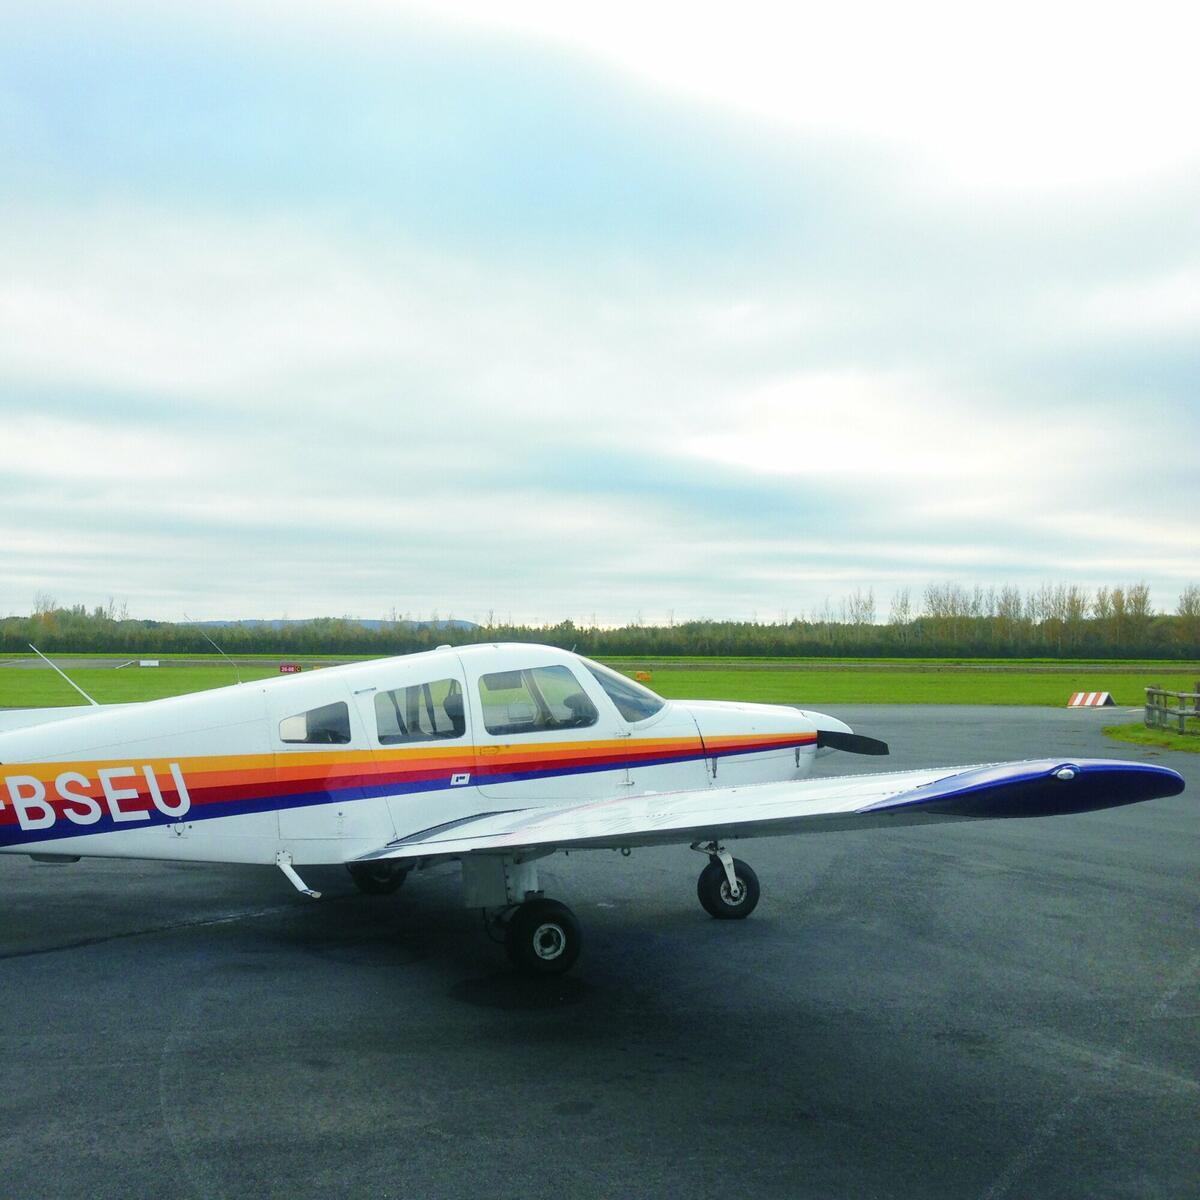 Club PA28, ideal for a Trial Flight with friends